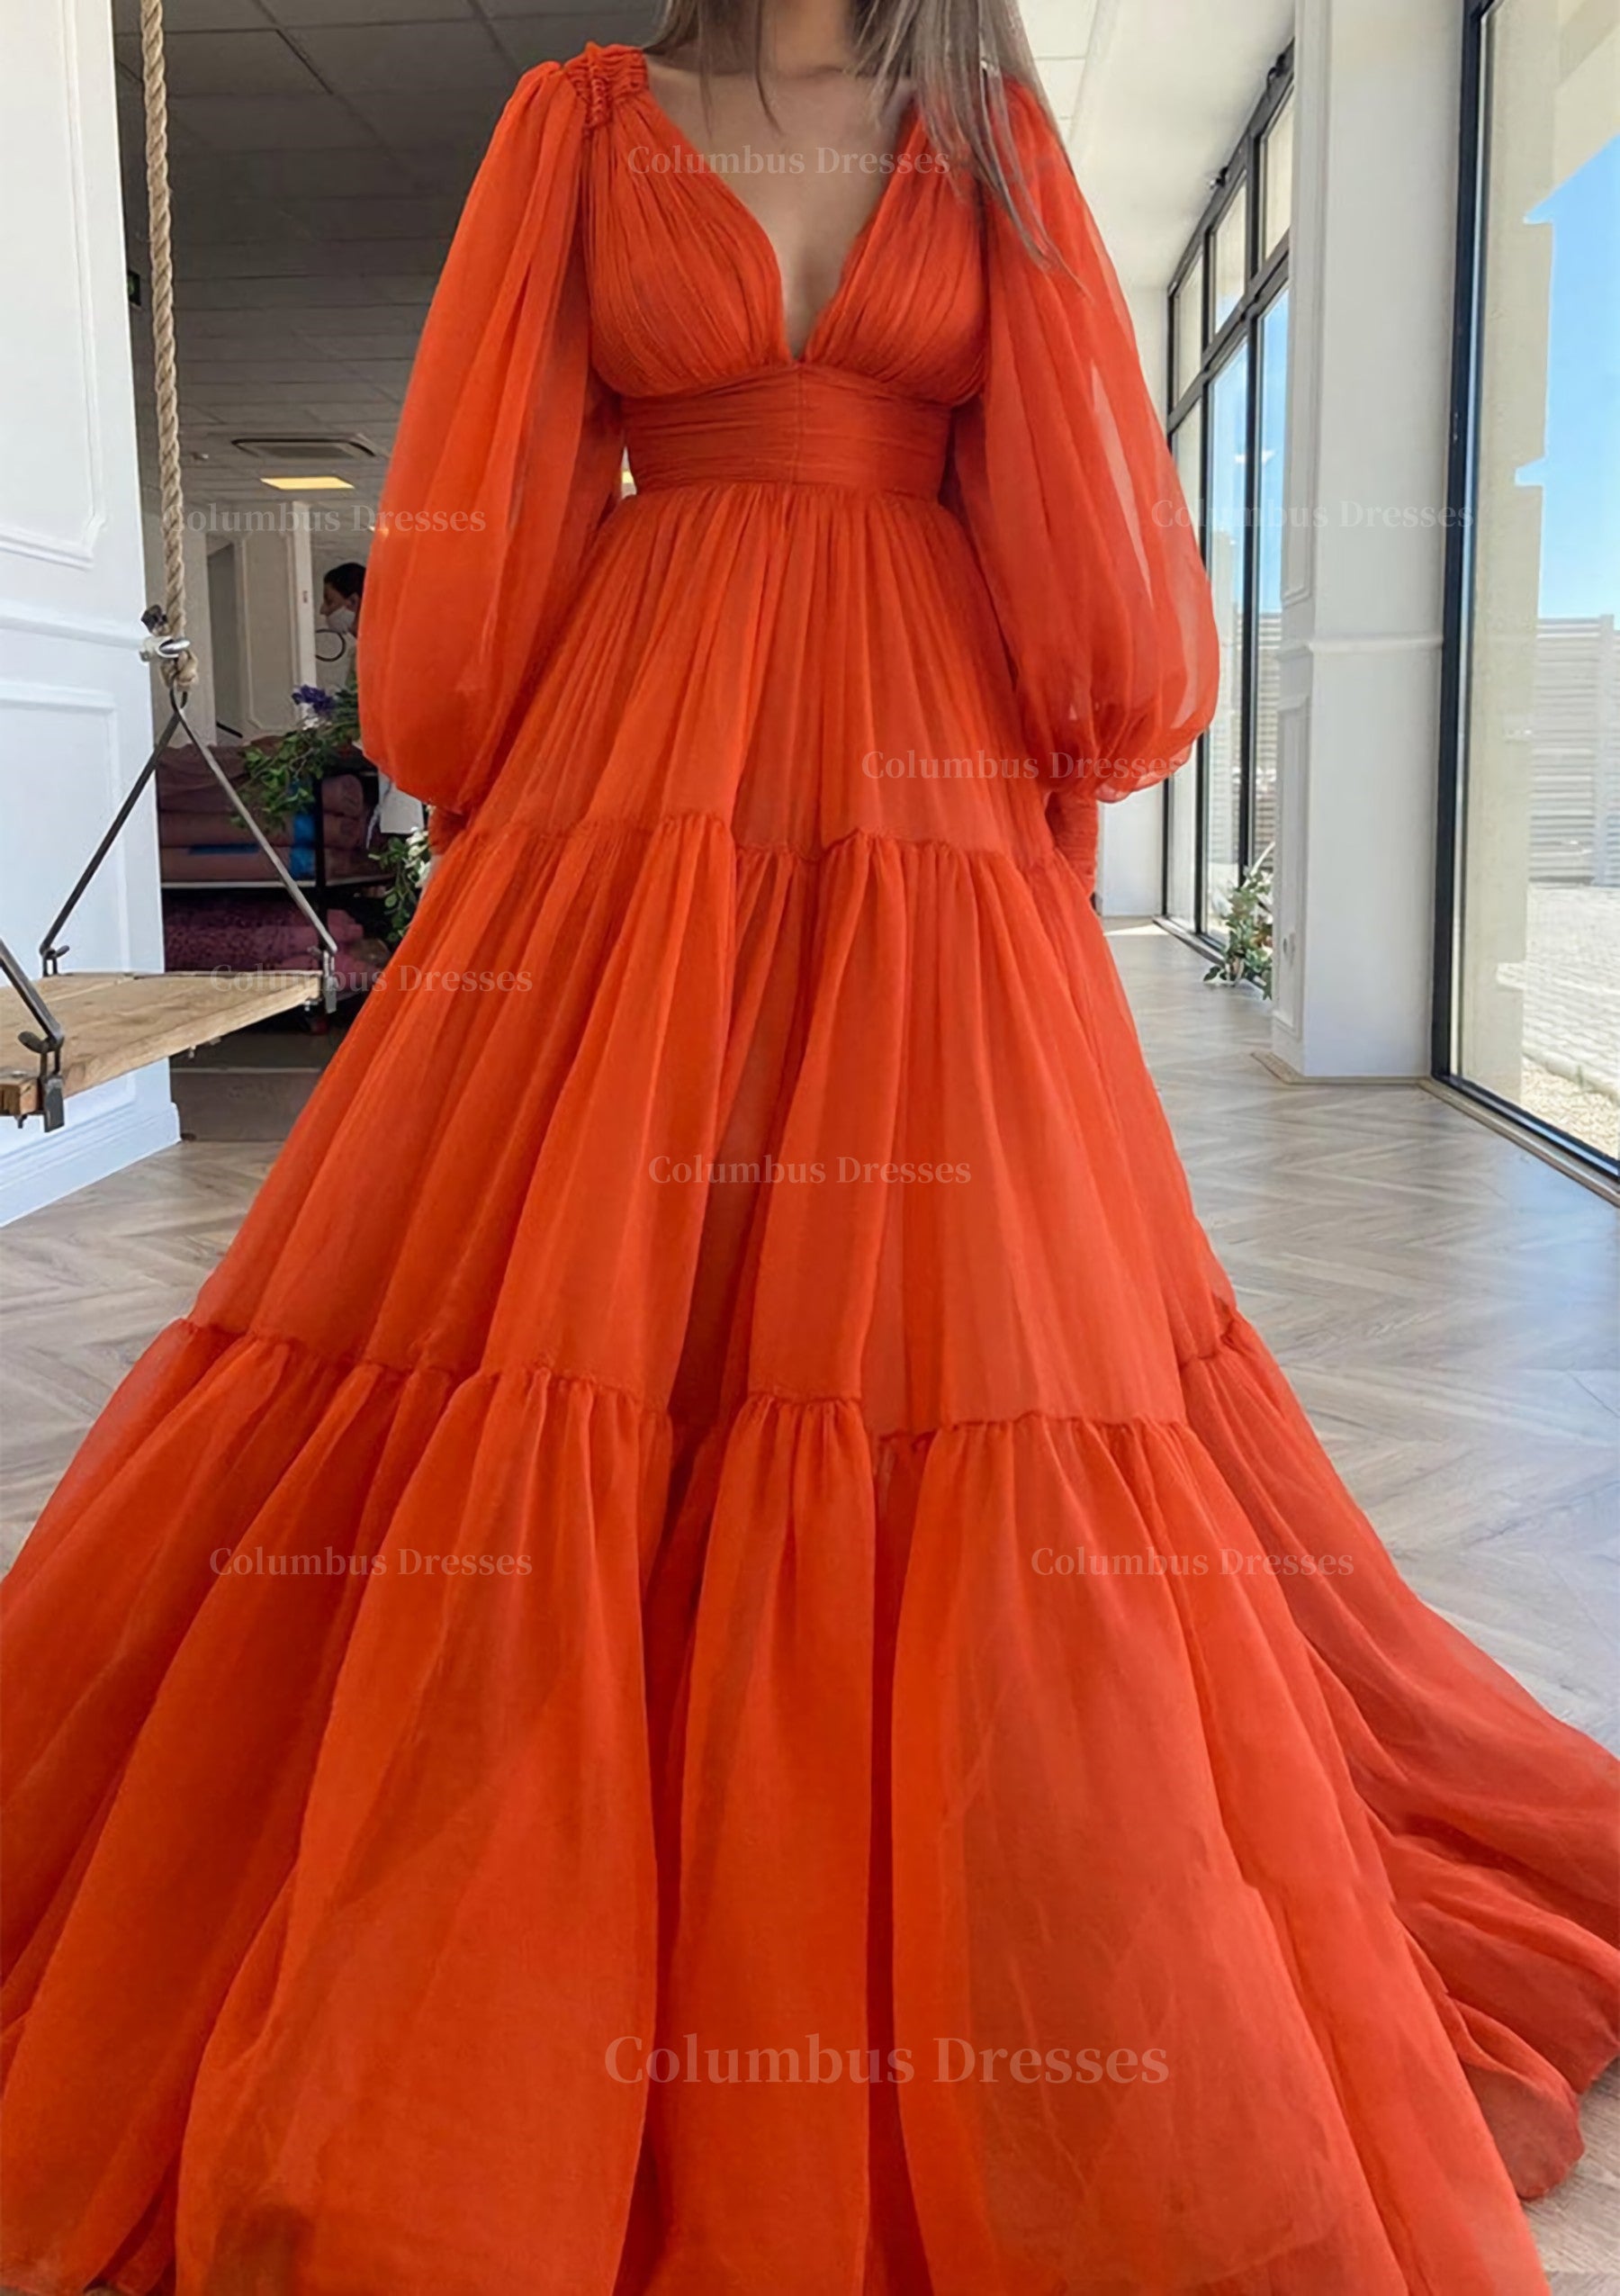 Prom Dress A Line, A-line V Neck Full/Long Sleeve Long/Floor-Length Chiffon Prom Dress With Pleated